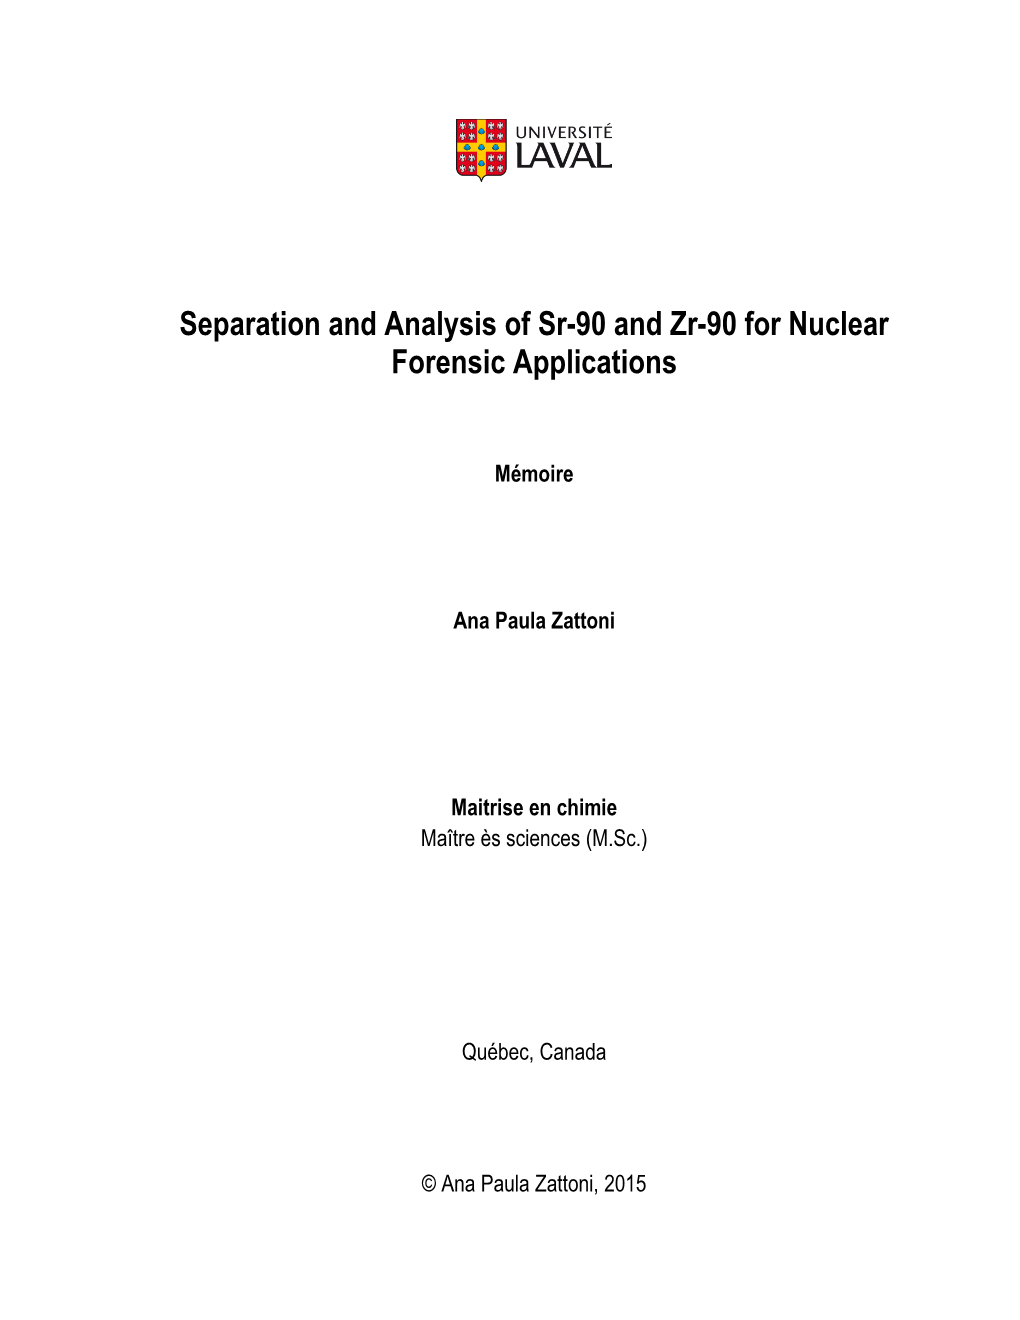 Separation and Analysis of Sr-90 and Zr-90 for Nuclear Forensic Applications